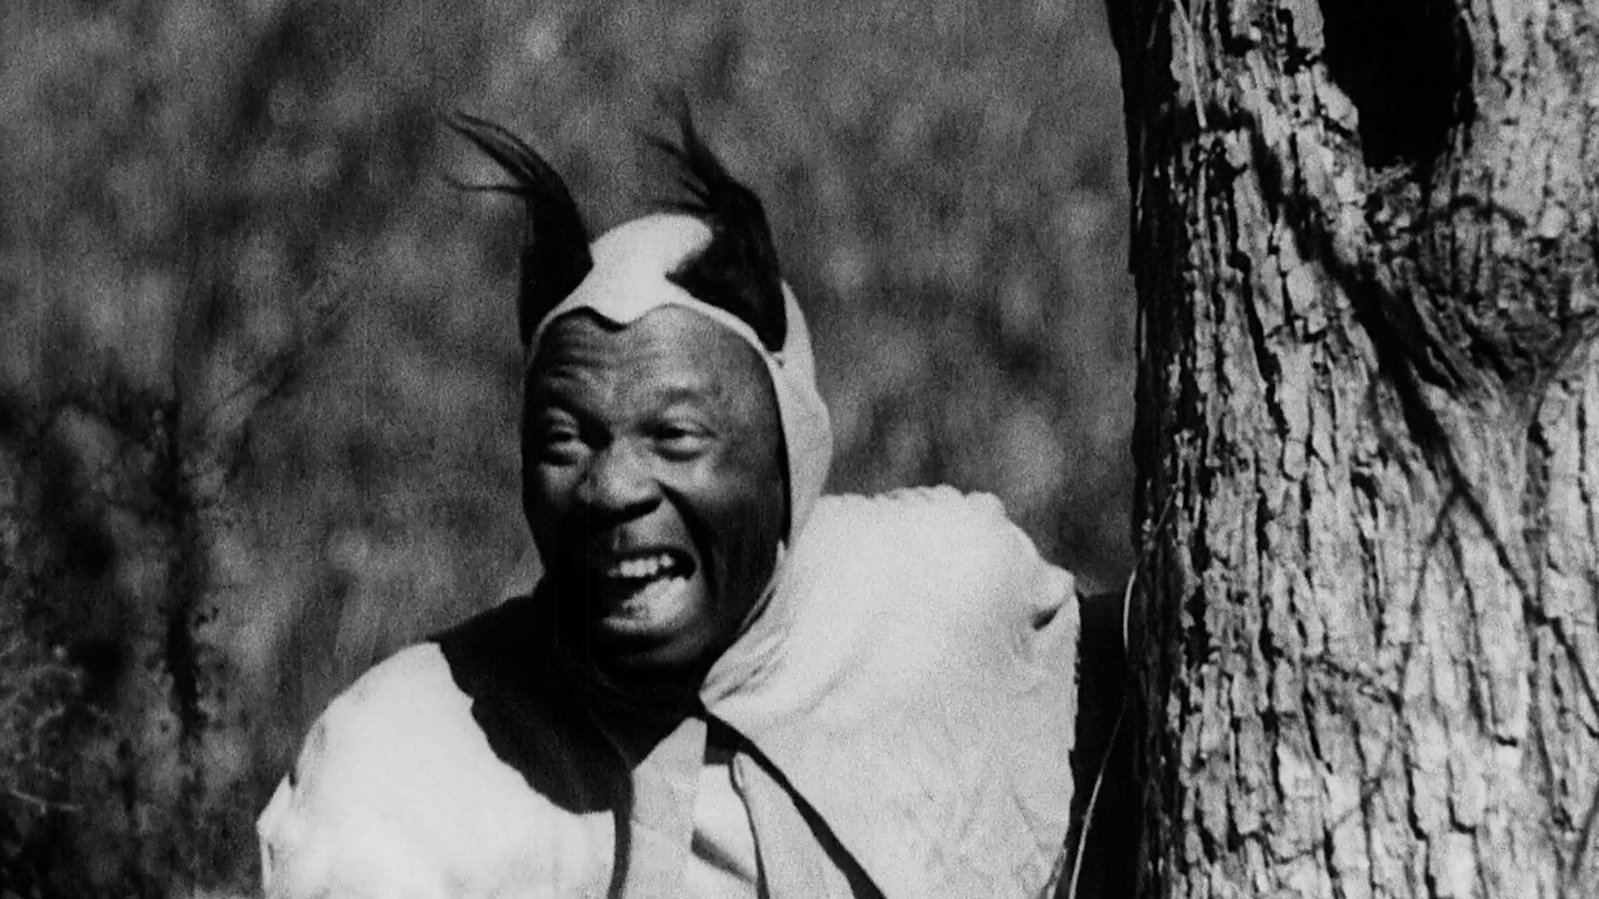 A medium brown skinned man in a devil costume with horns peers from behind a tree with his mouth open in a diabolical laugh